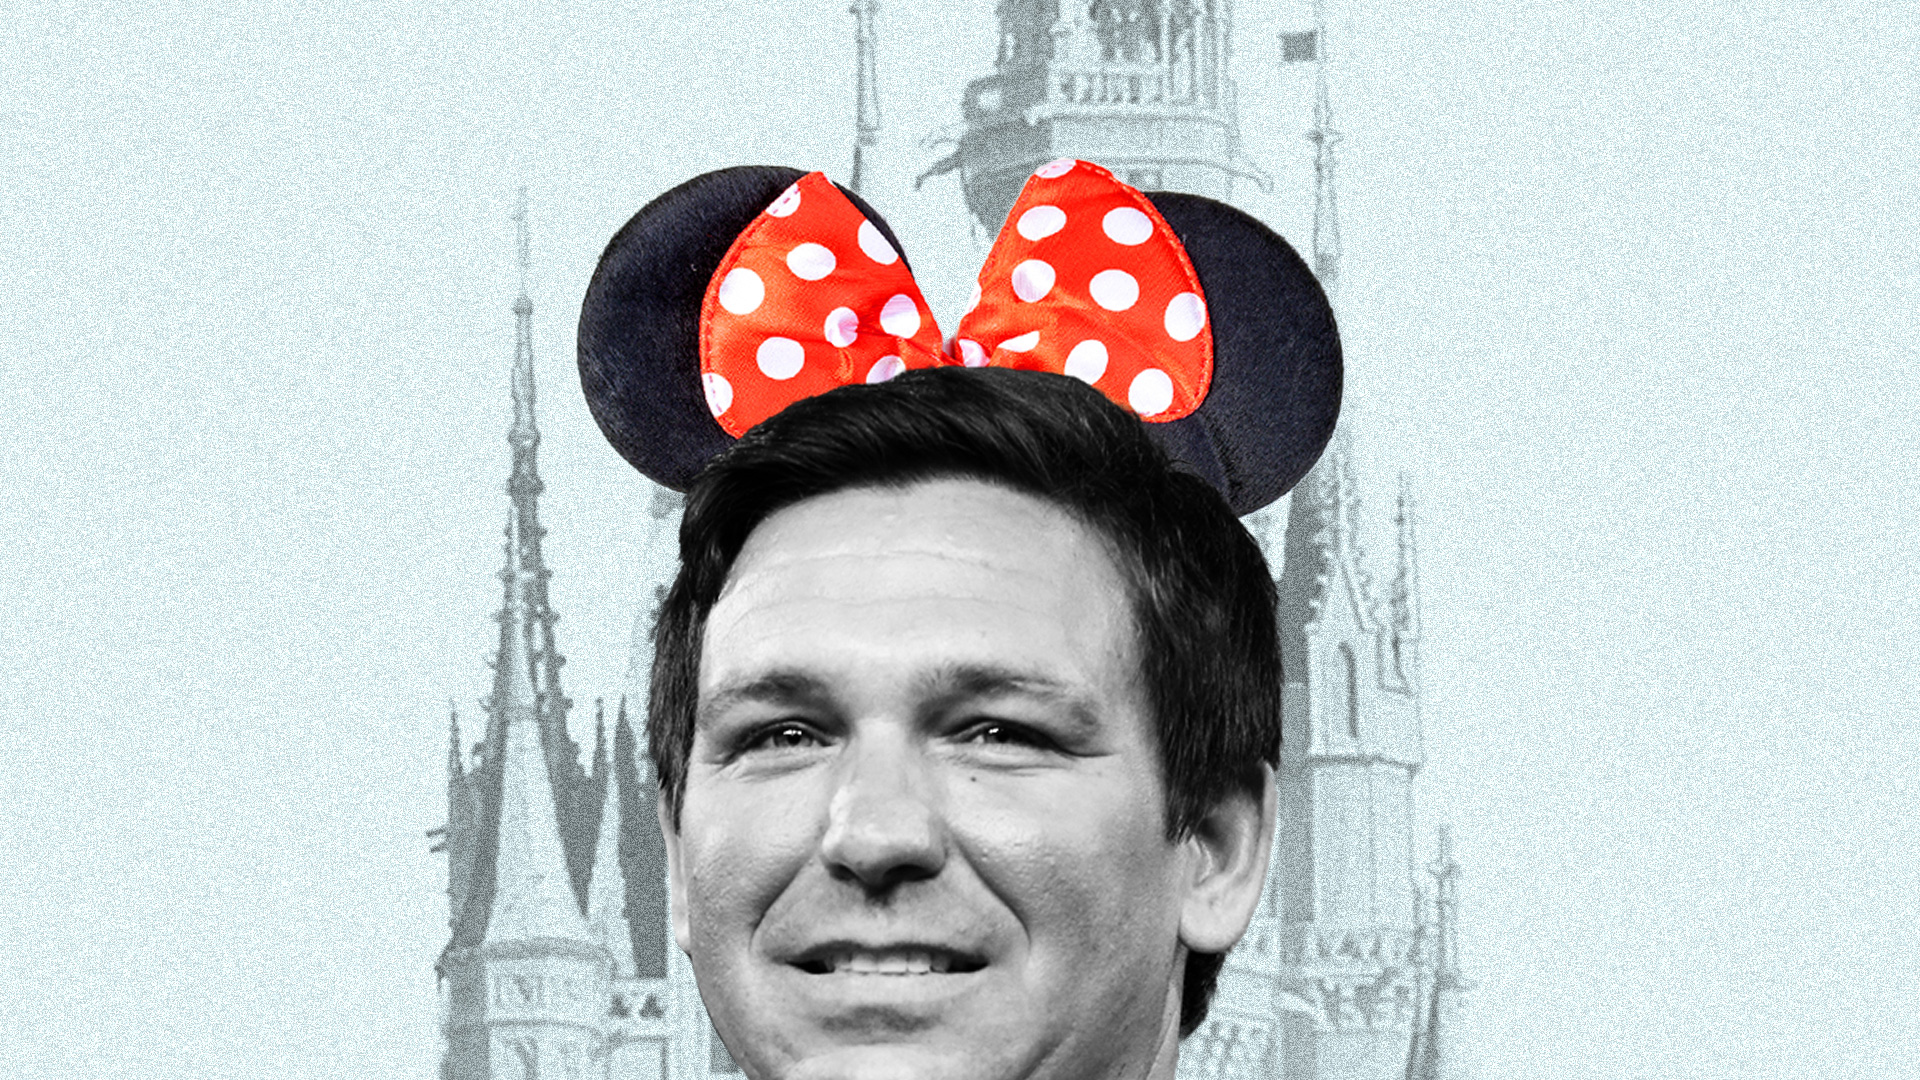 In a recent Wall Street Journal op-ed, Florida Governor Ron DeSantis excoriated US business leaders as woke ideologists and cultural Marxists. DeSantis has shown a willingness to punish businesses such as Disney through state-driven economic retribution - but the divorce between the GOP and big business runs far deeper. (Gage Skidmore)